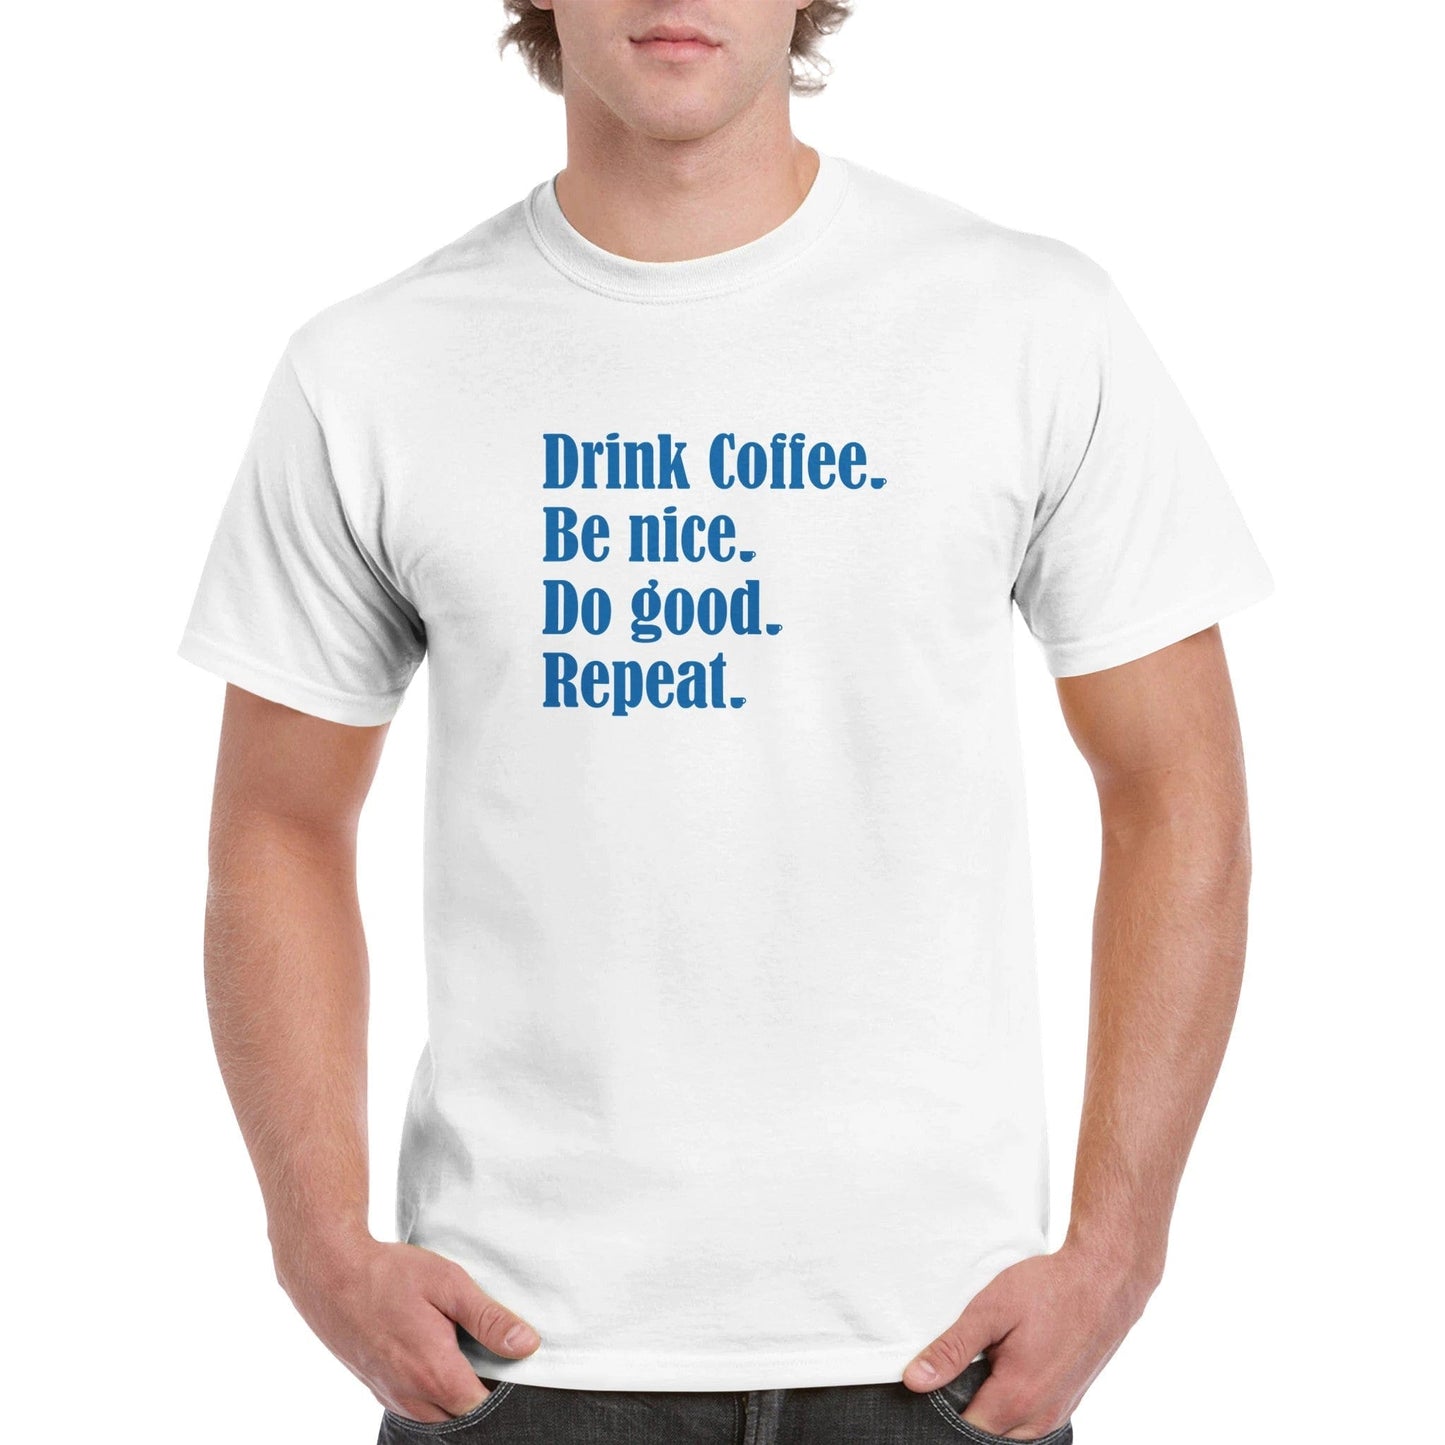 Good Bean Gifts Drink Coffee, Be Nice, Do Good, Repeat - Crewneck T-shirt White / S